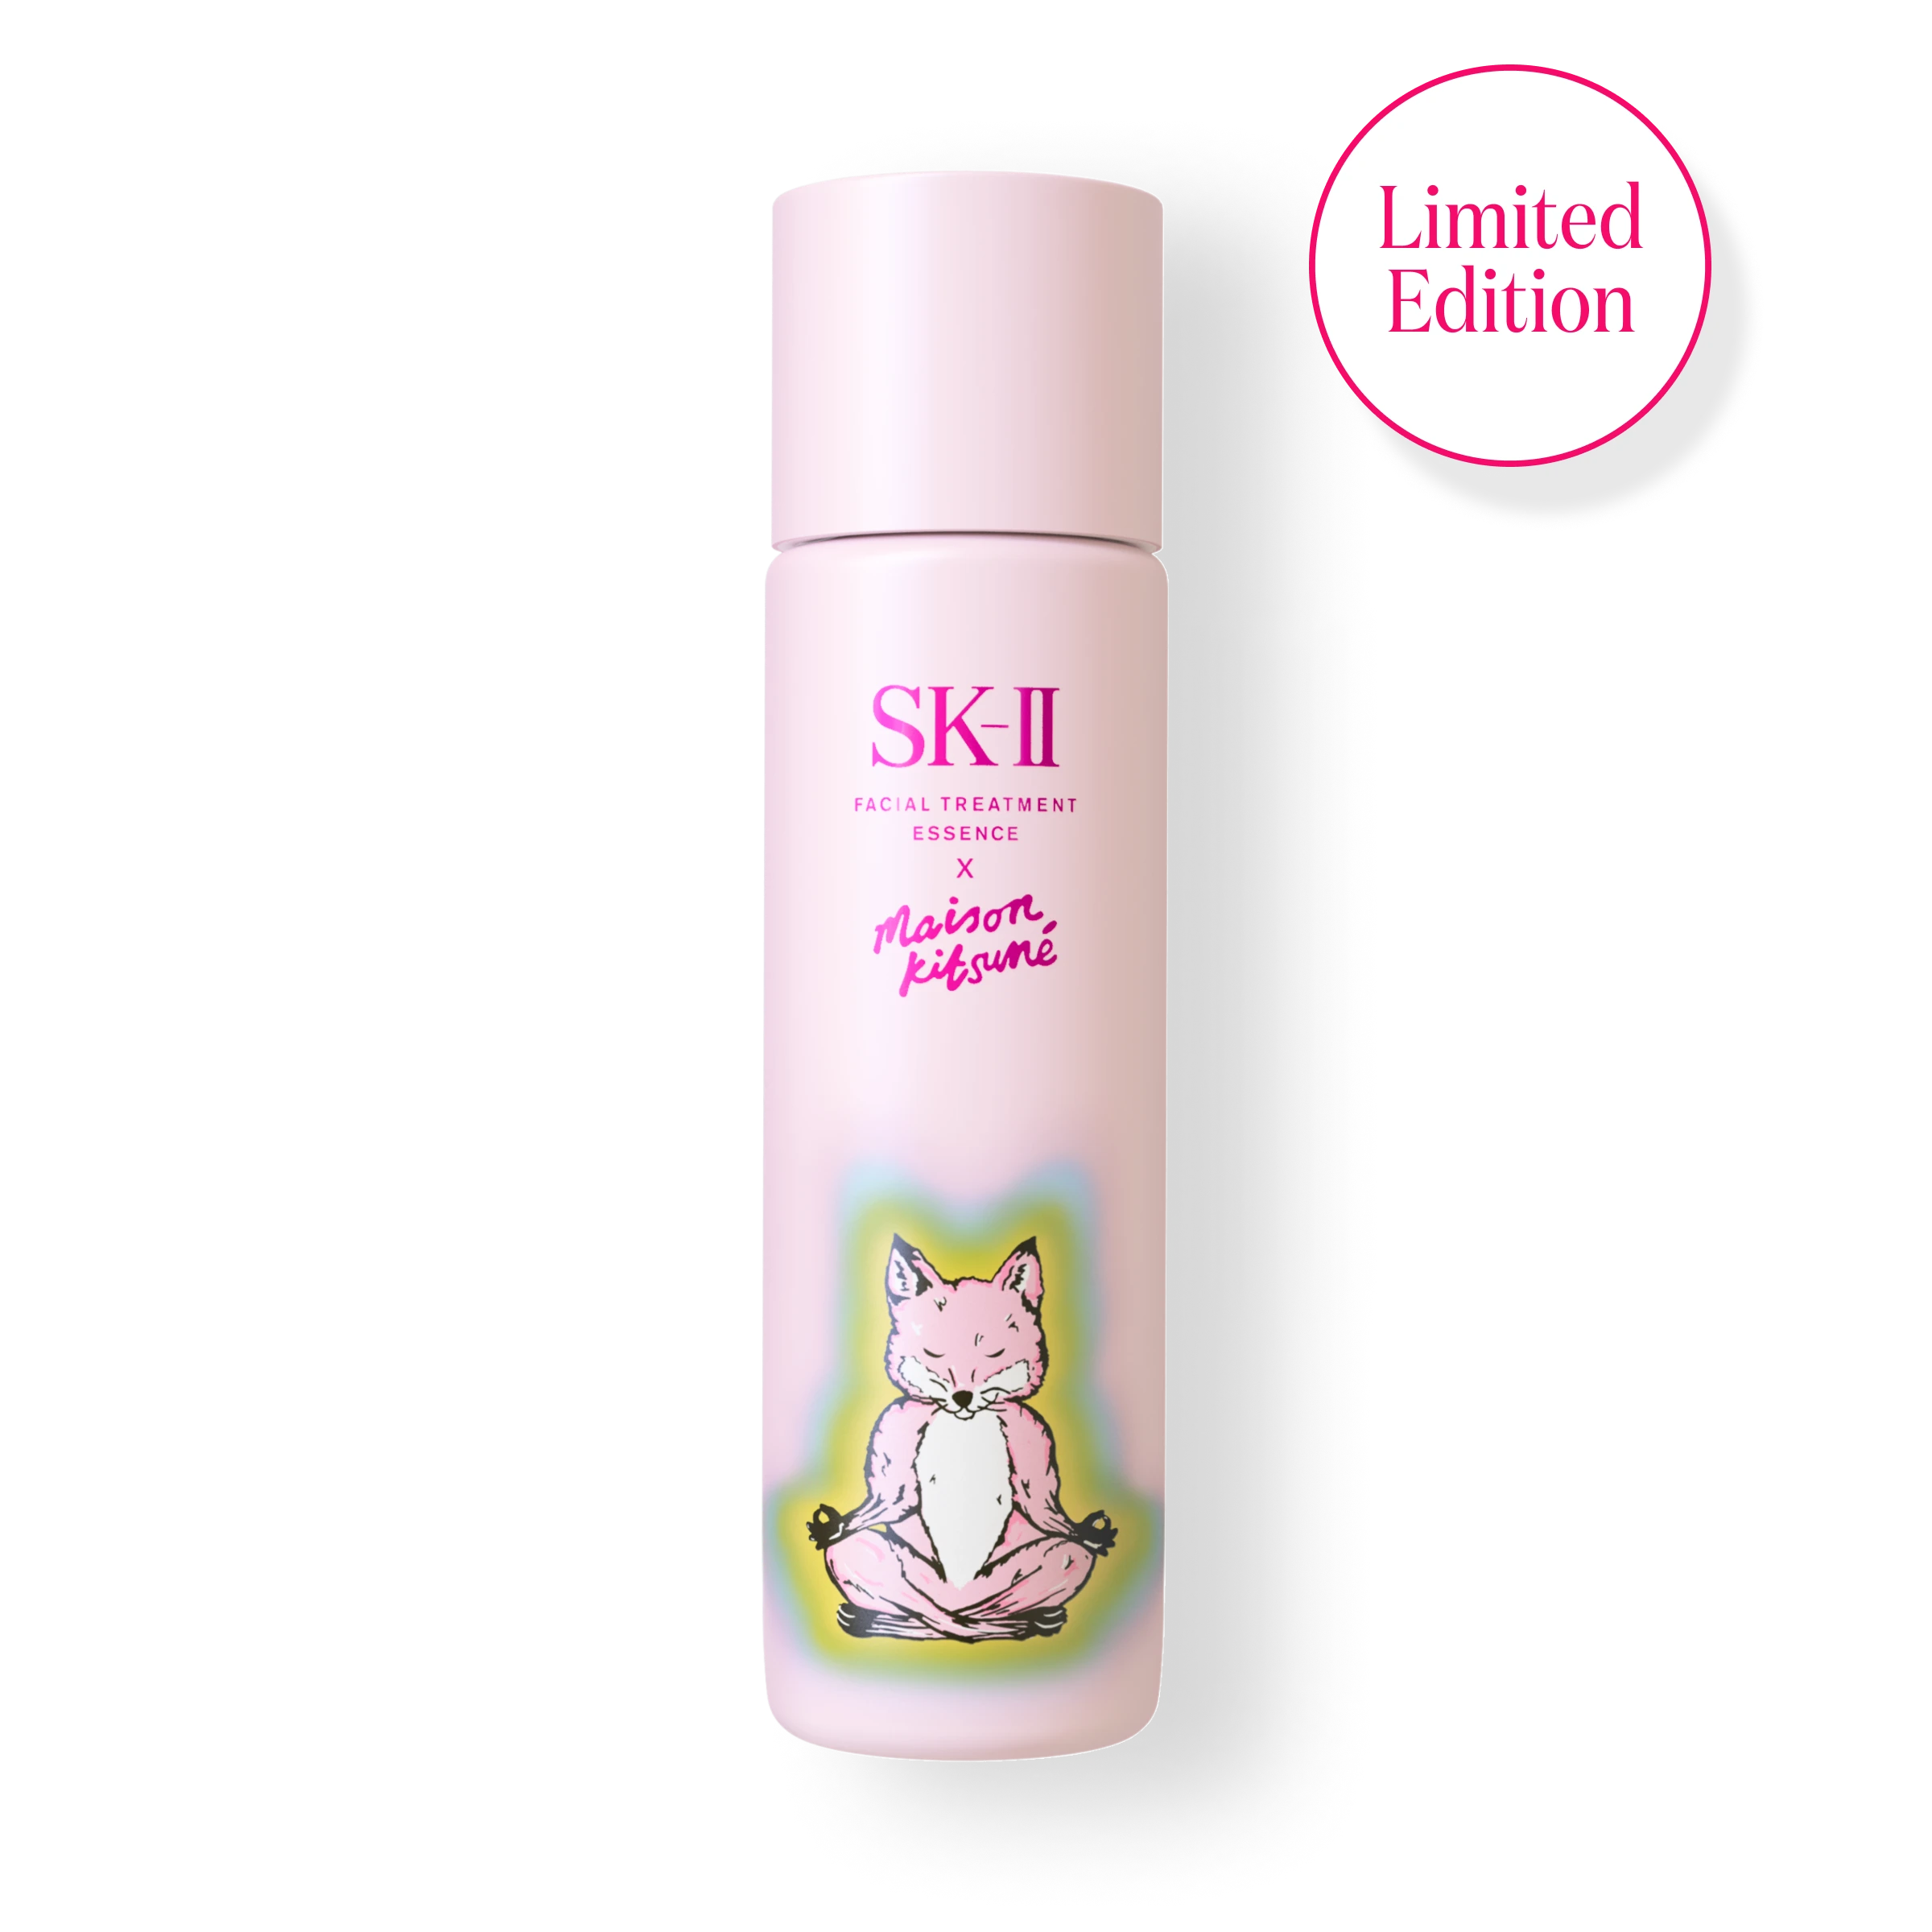 Skin Tightening Products for Firmer Skin | SK-II Singapore